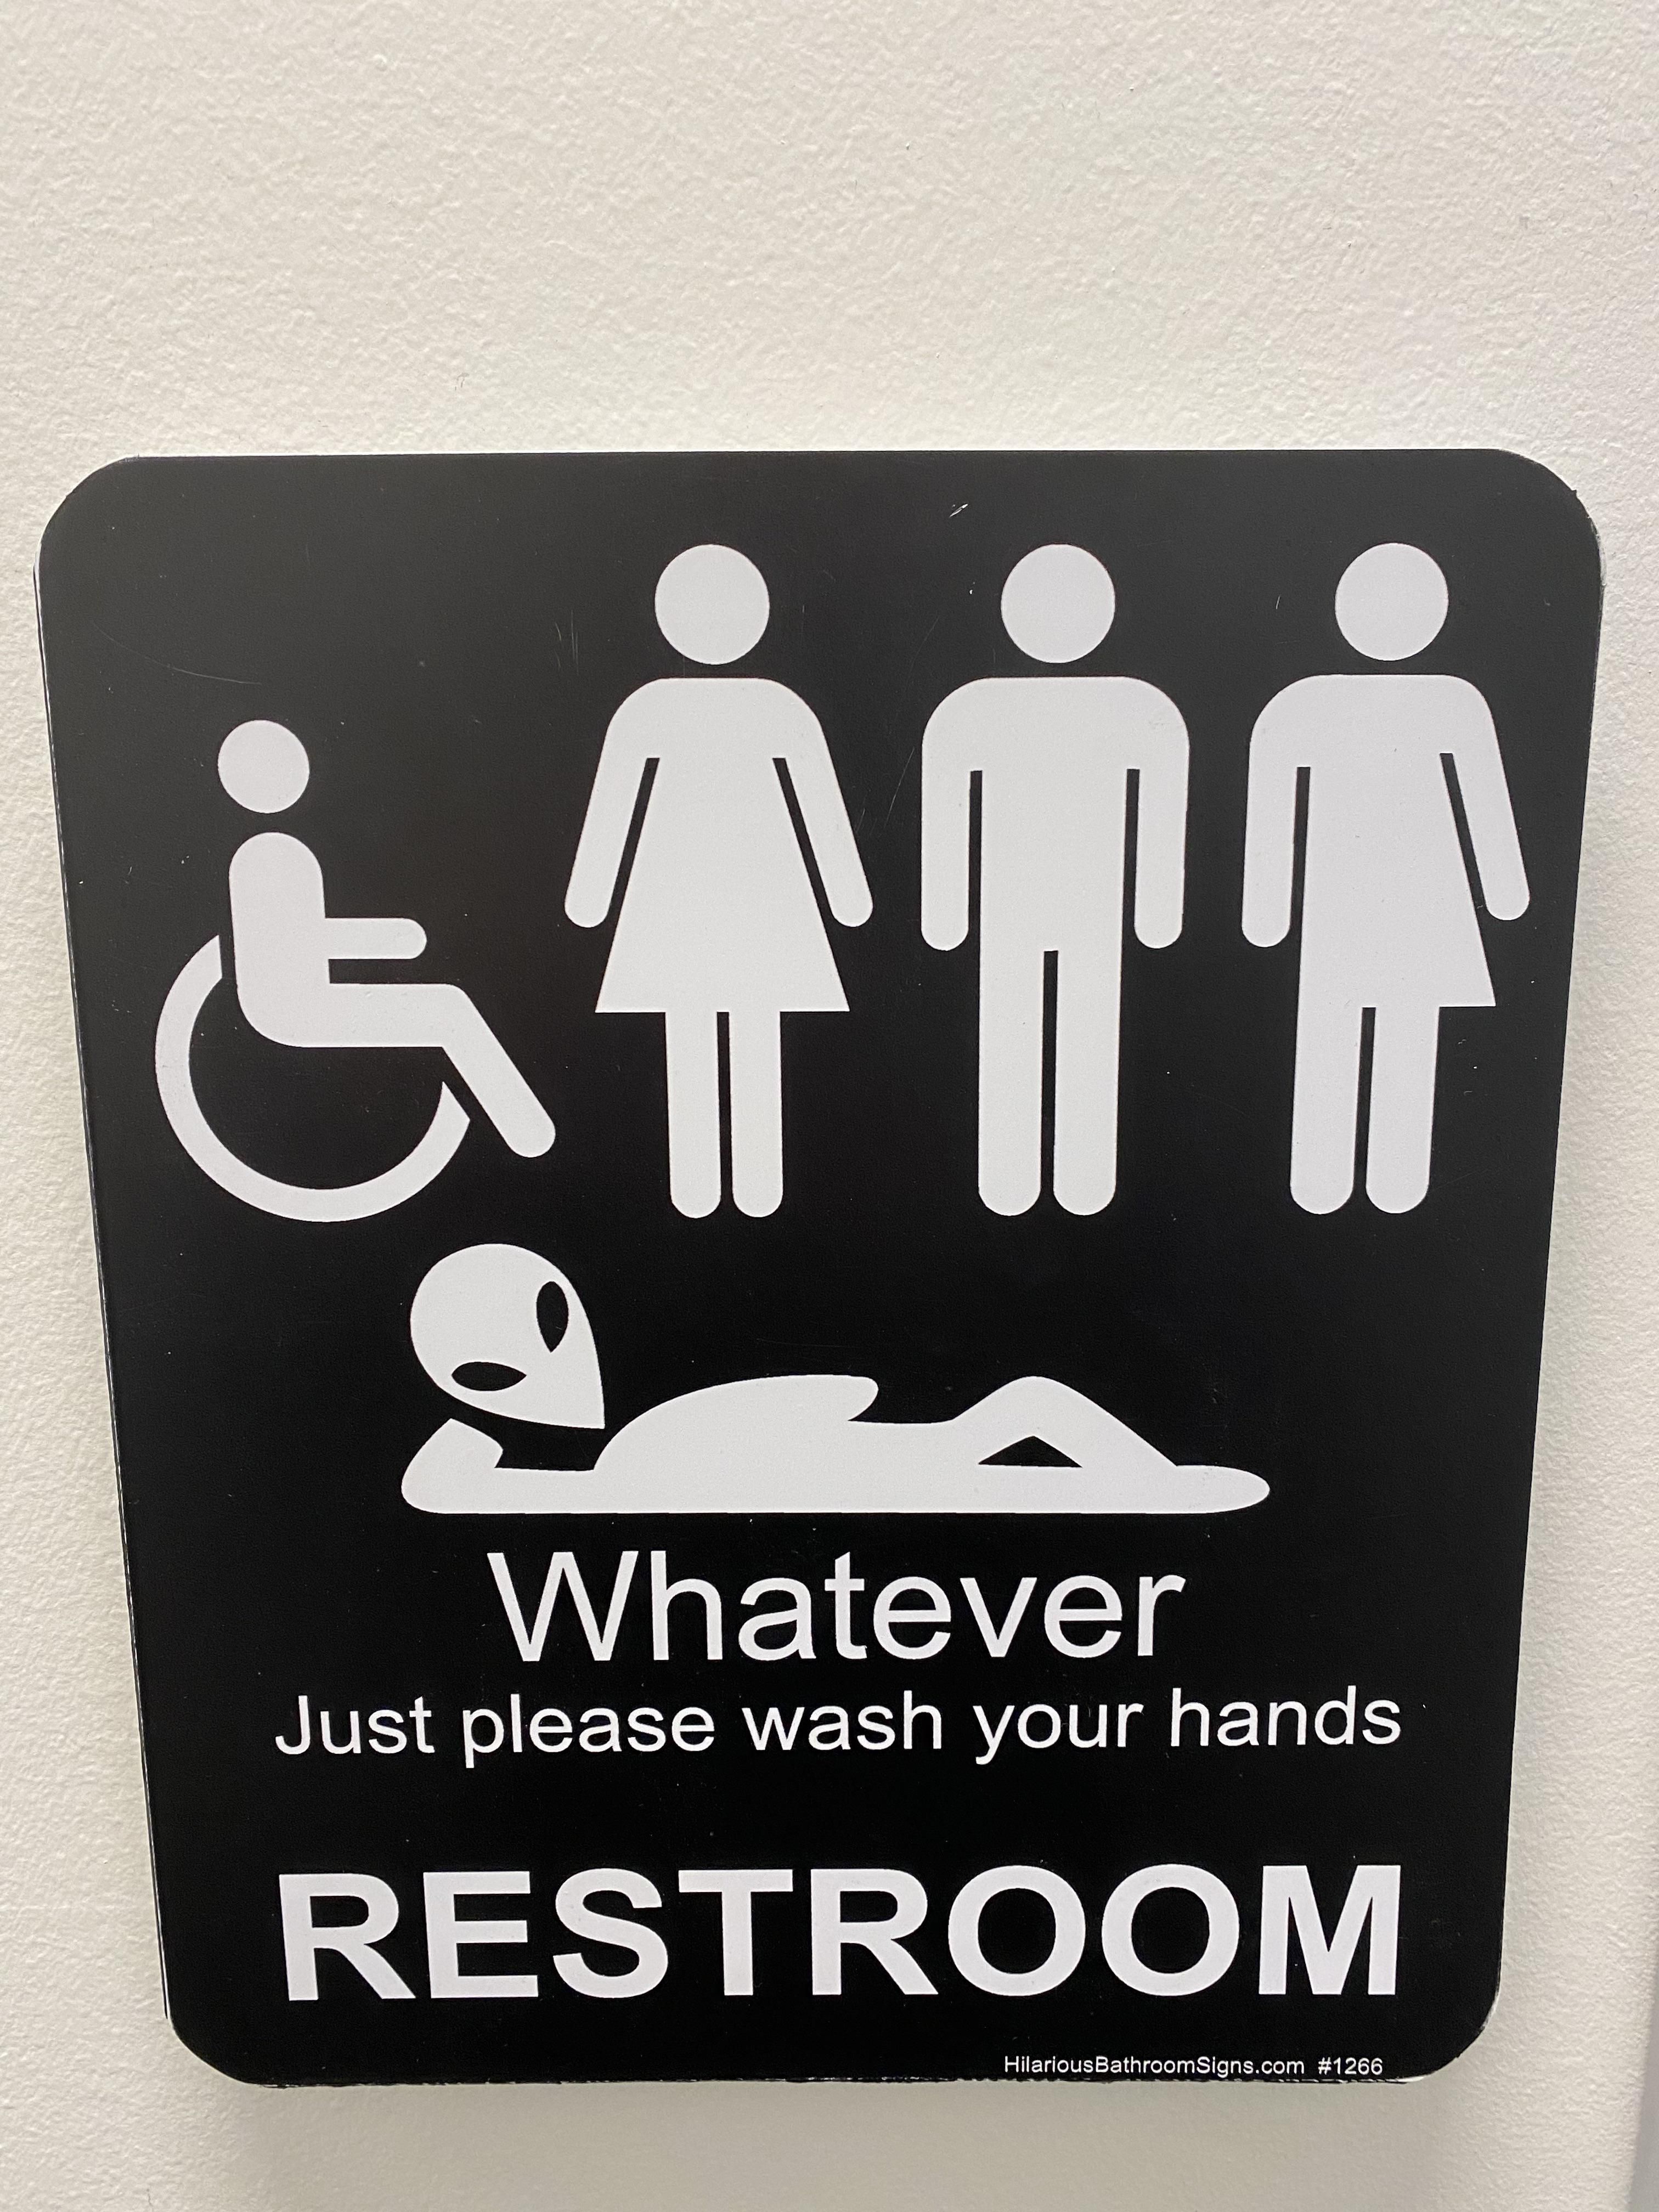 The new bathroom signs at work.